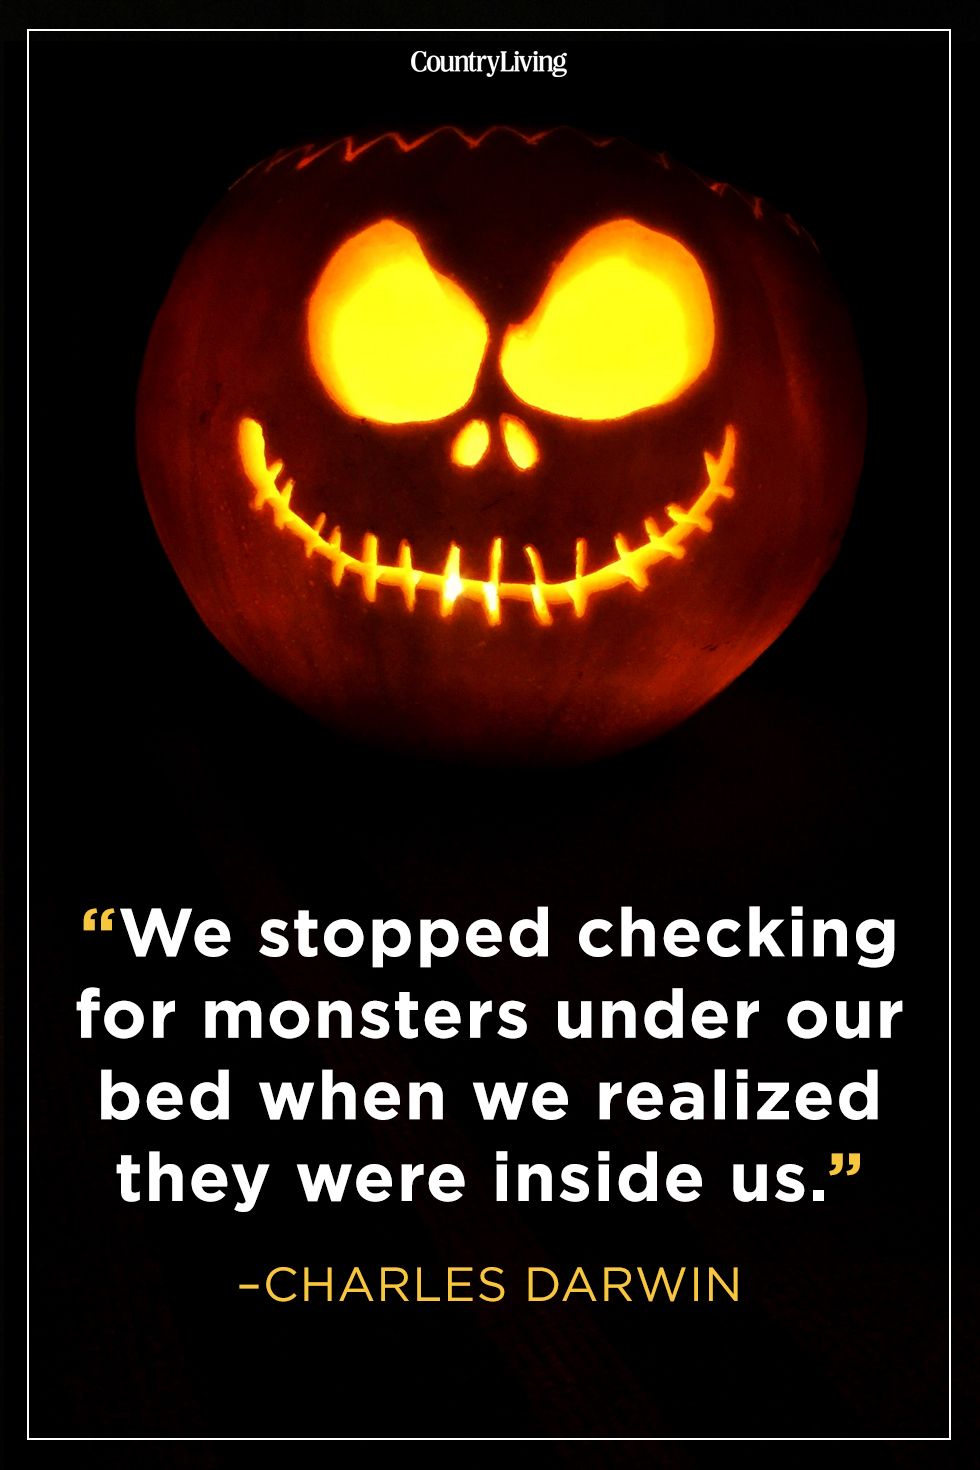 50 Scary Quotes - Creepy Quotes & Sayings About Fear & Eerie Things